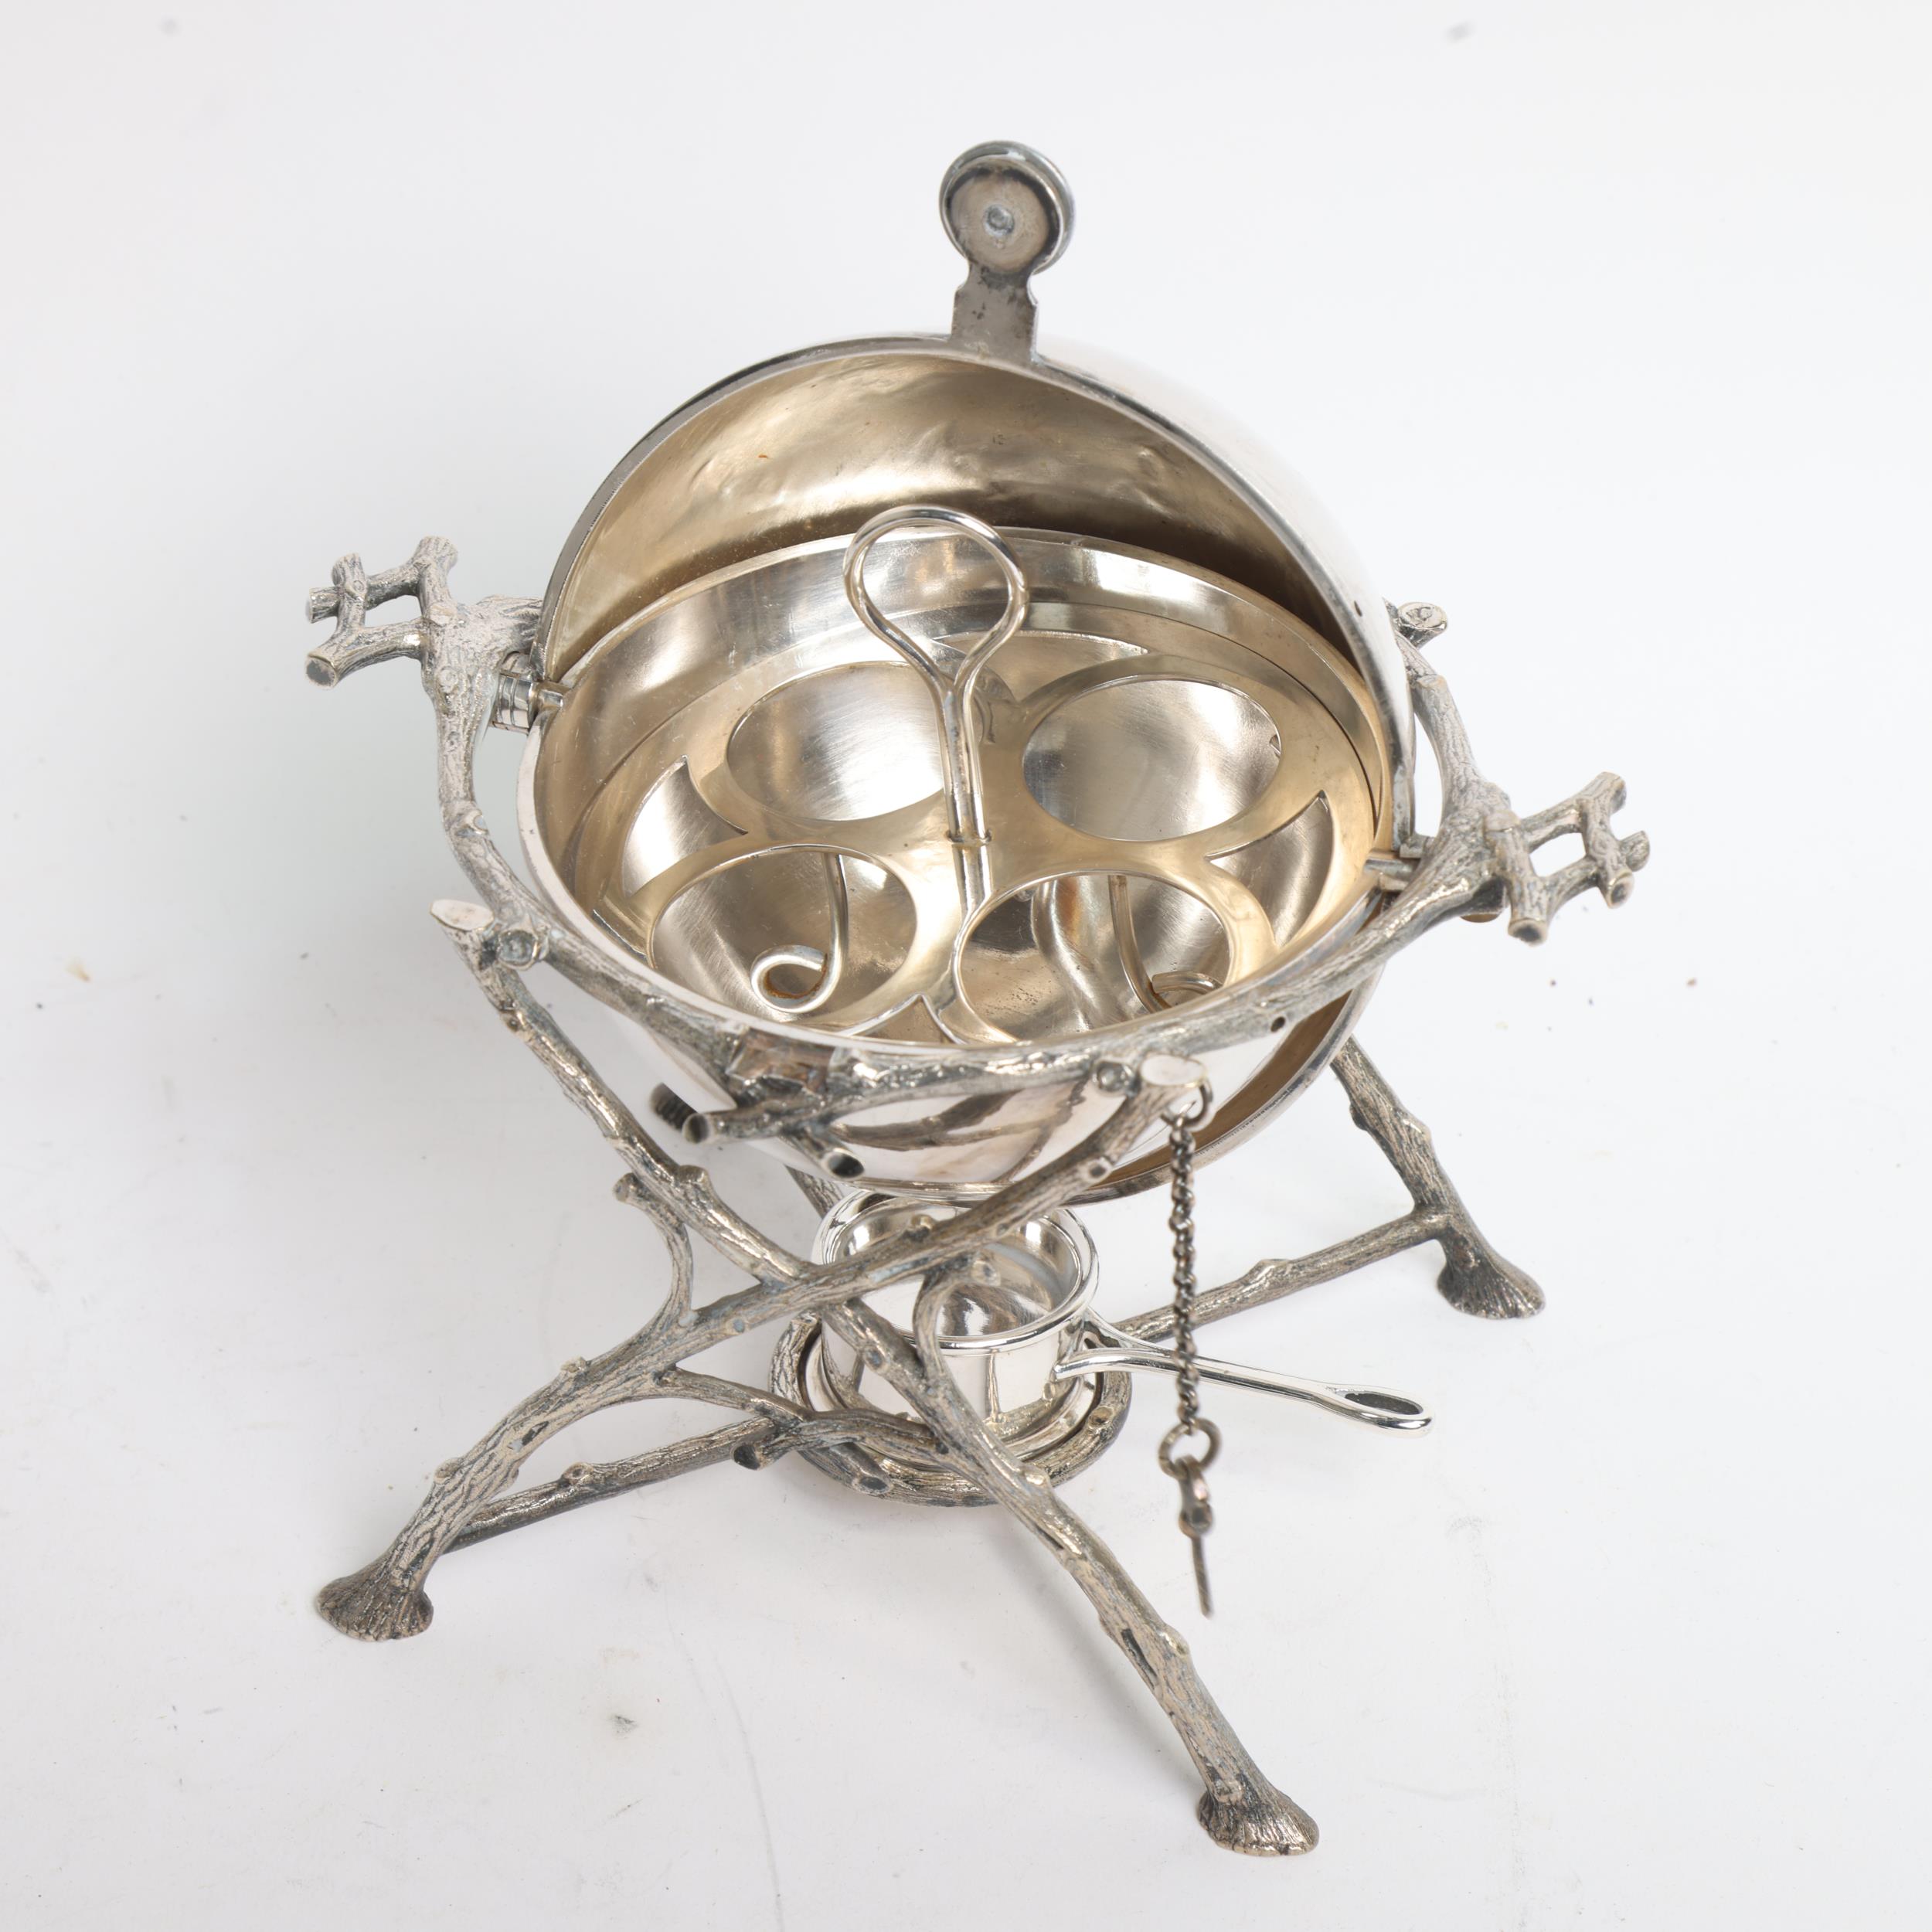 BENETEINK & COMPANY - an early 20th century silver plated egg coddler, with internal fitting for 4 - Image 2 of 2